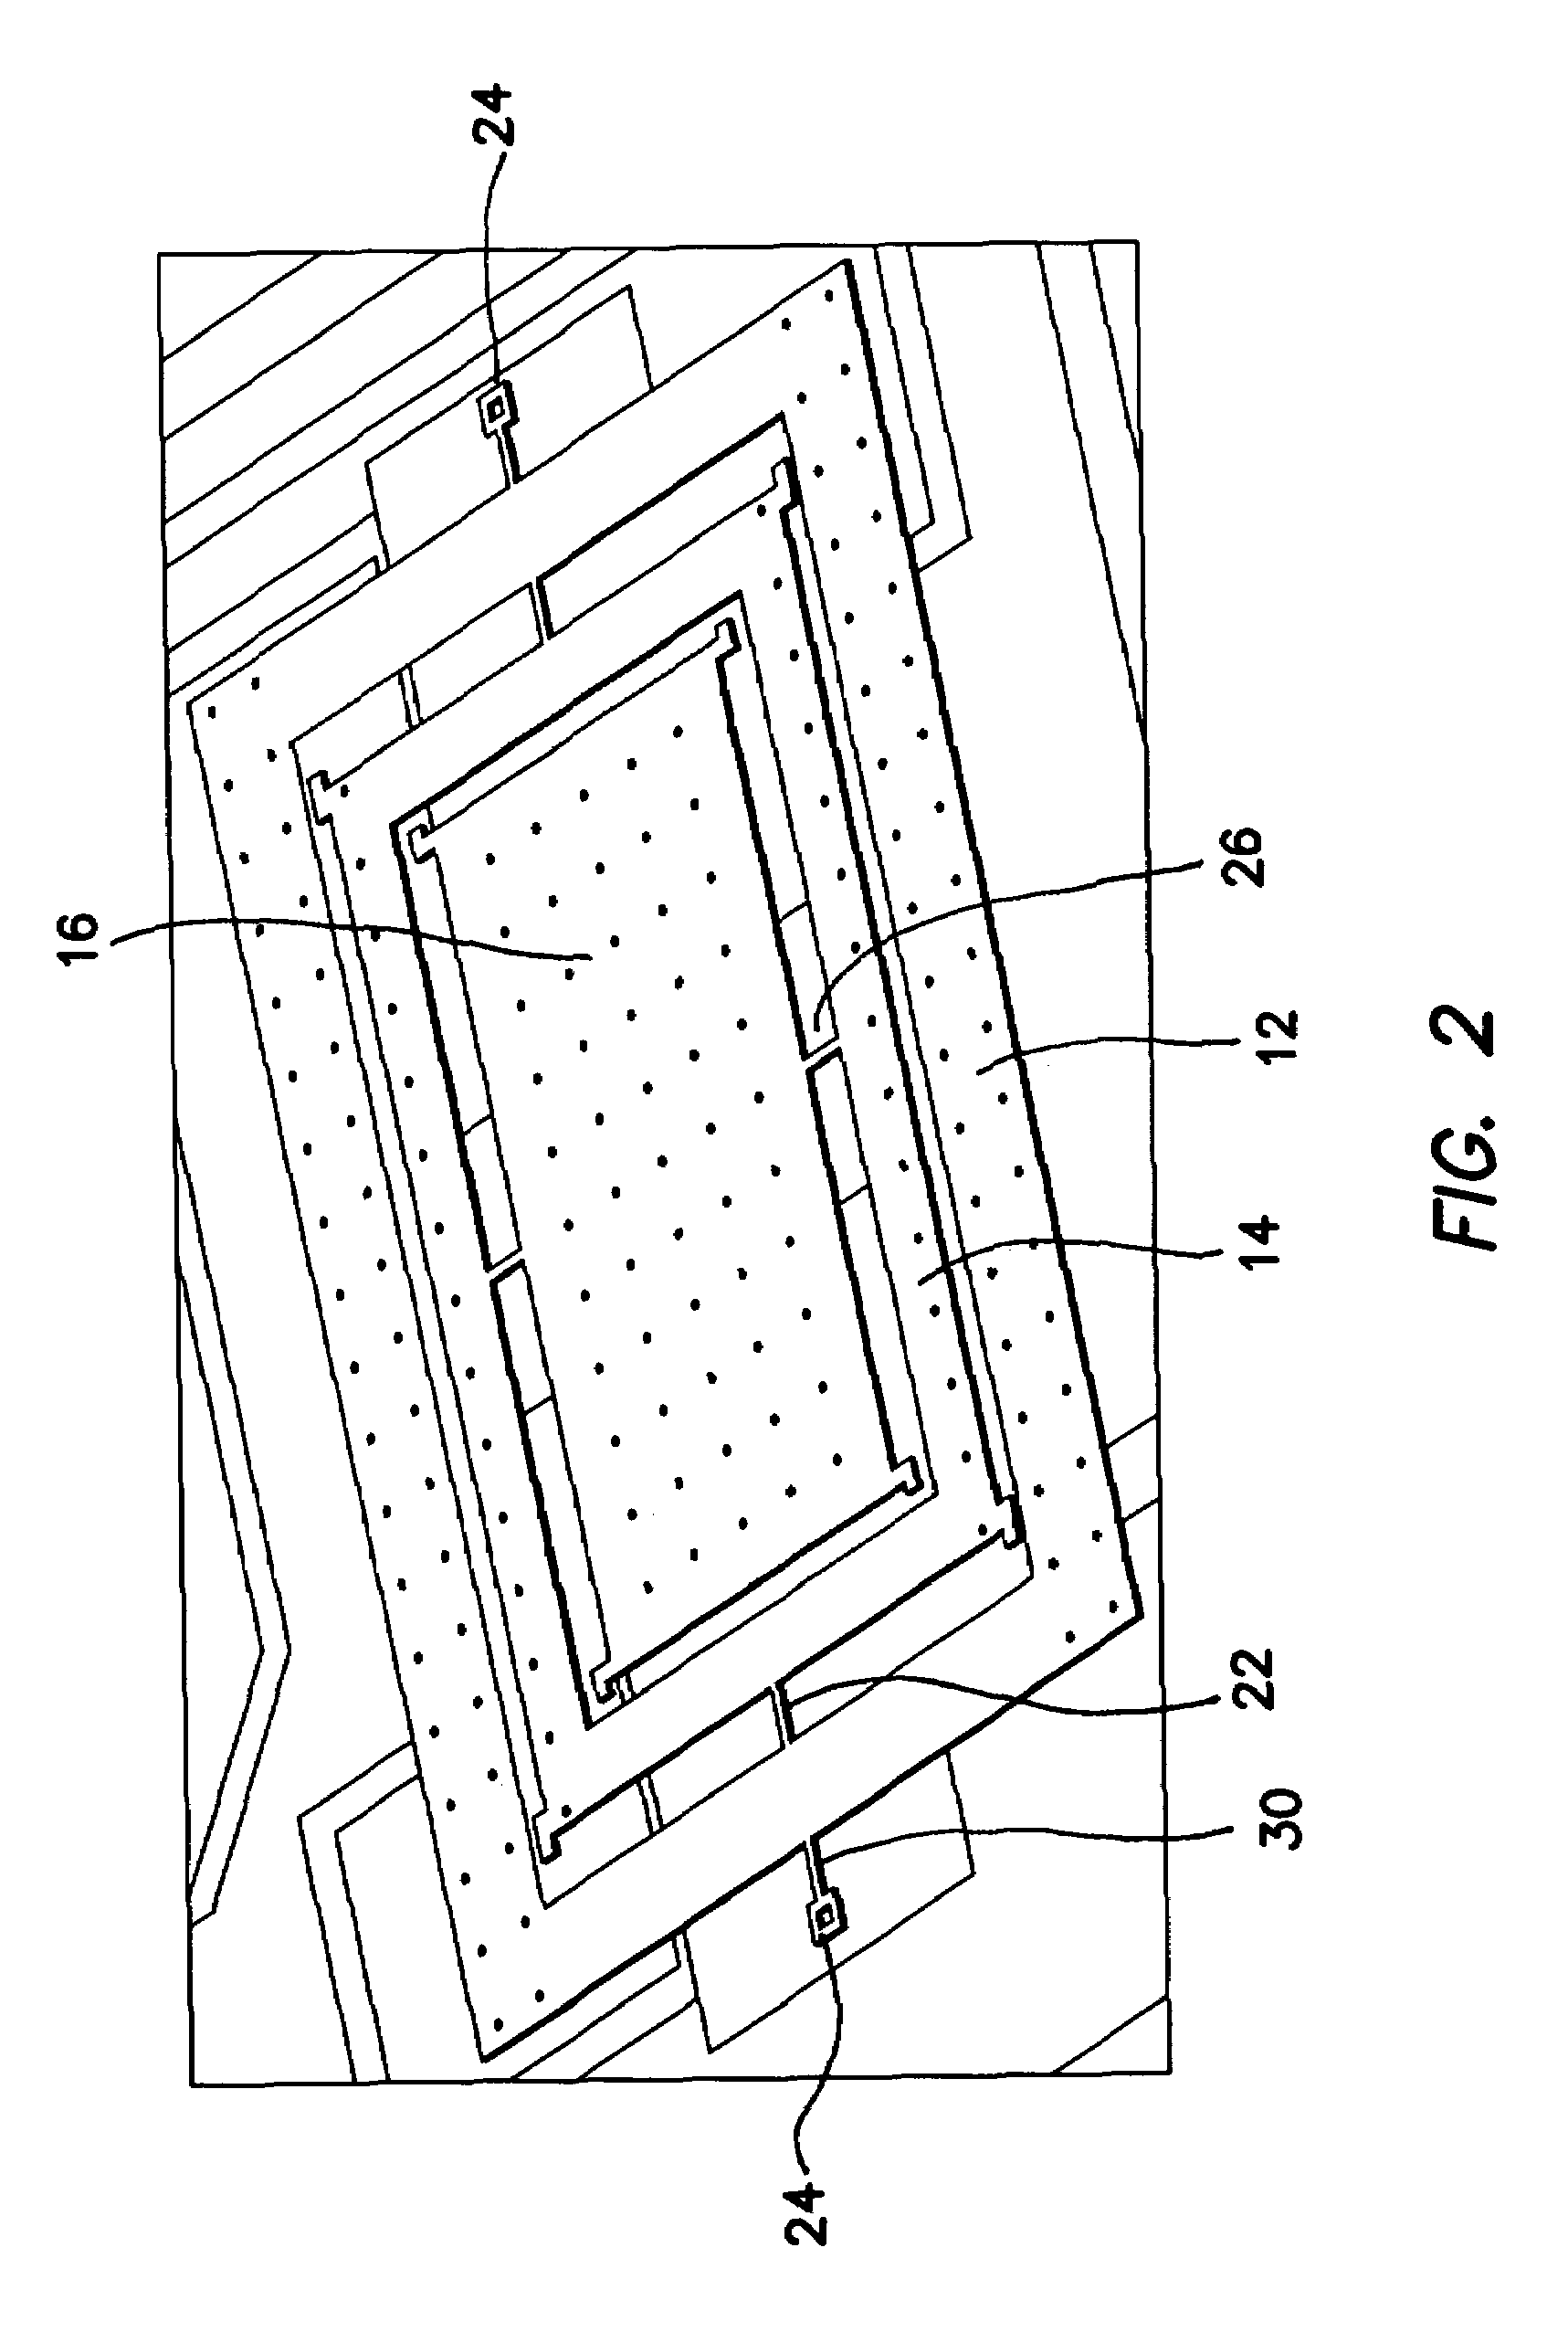 Torsional nonresonant z-axis micromachined gyroscope with non-resonant actuation to measure the angular rotation of an object